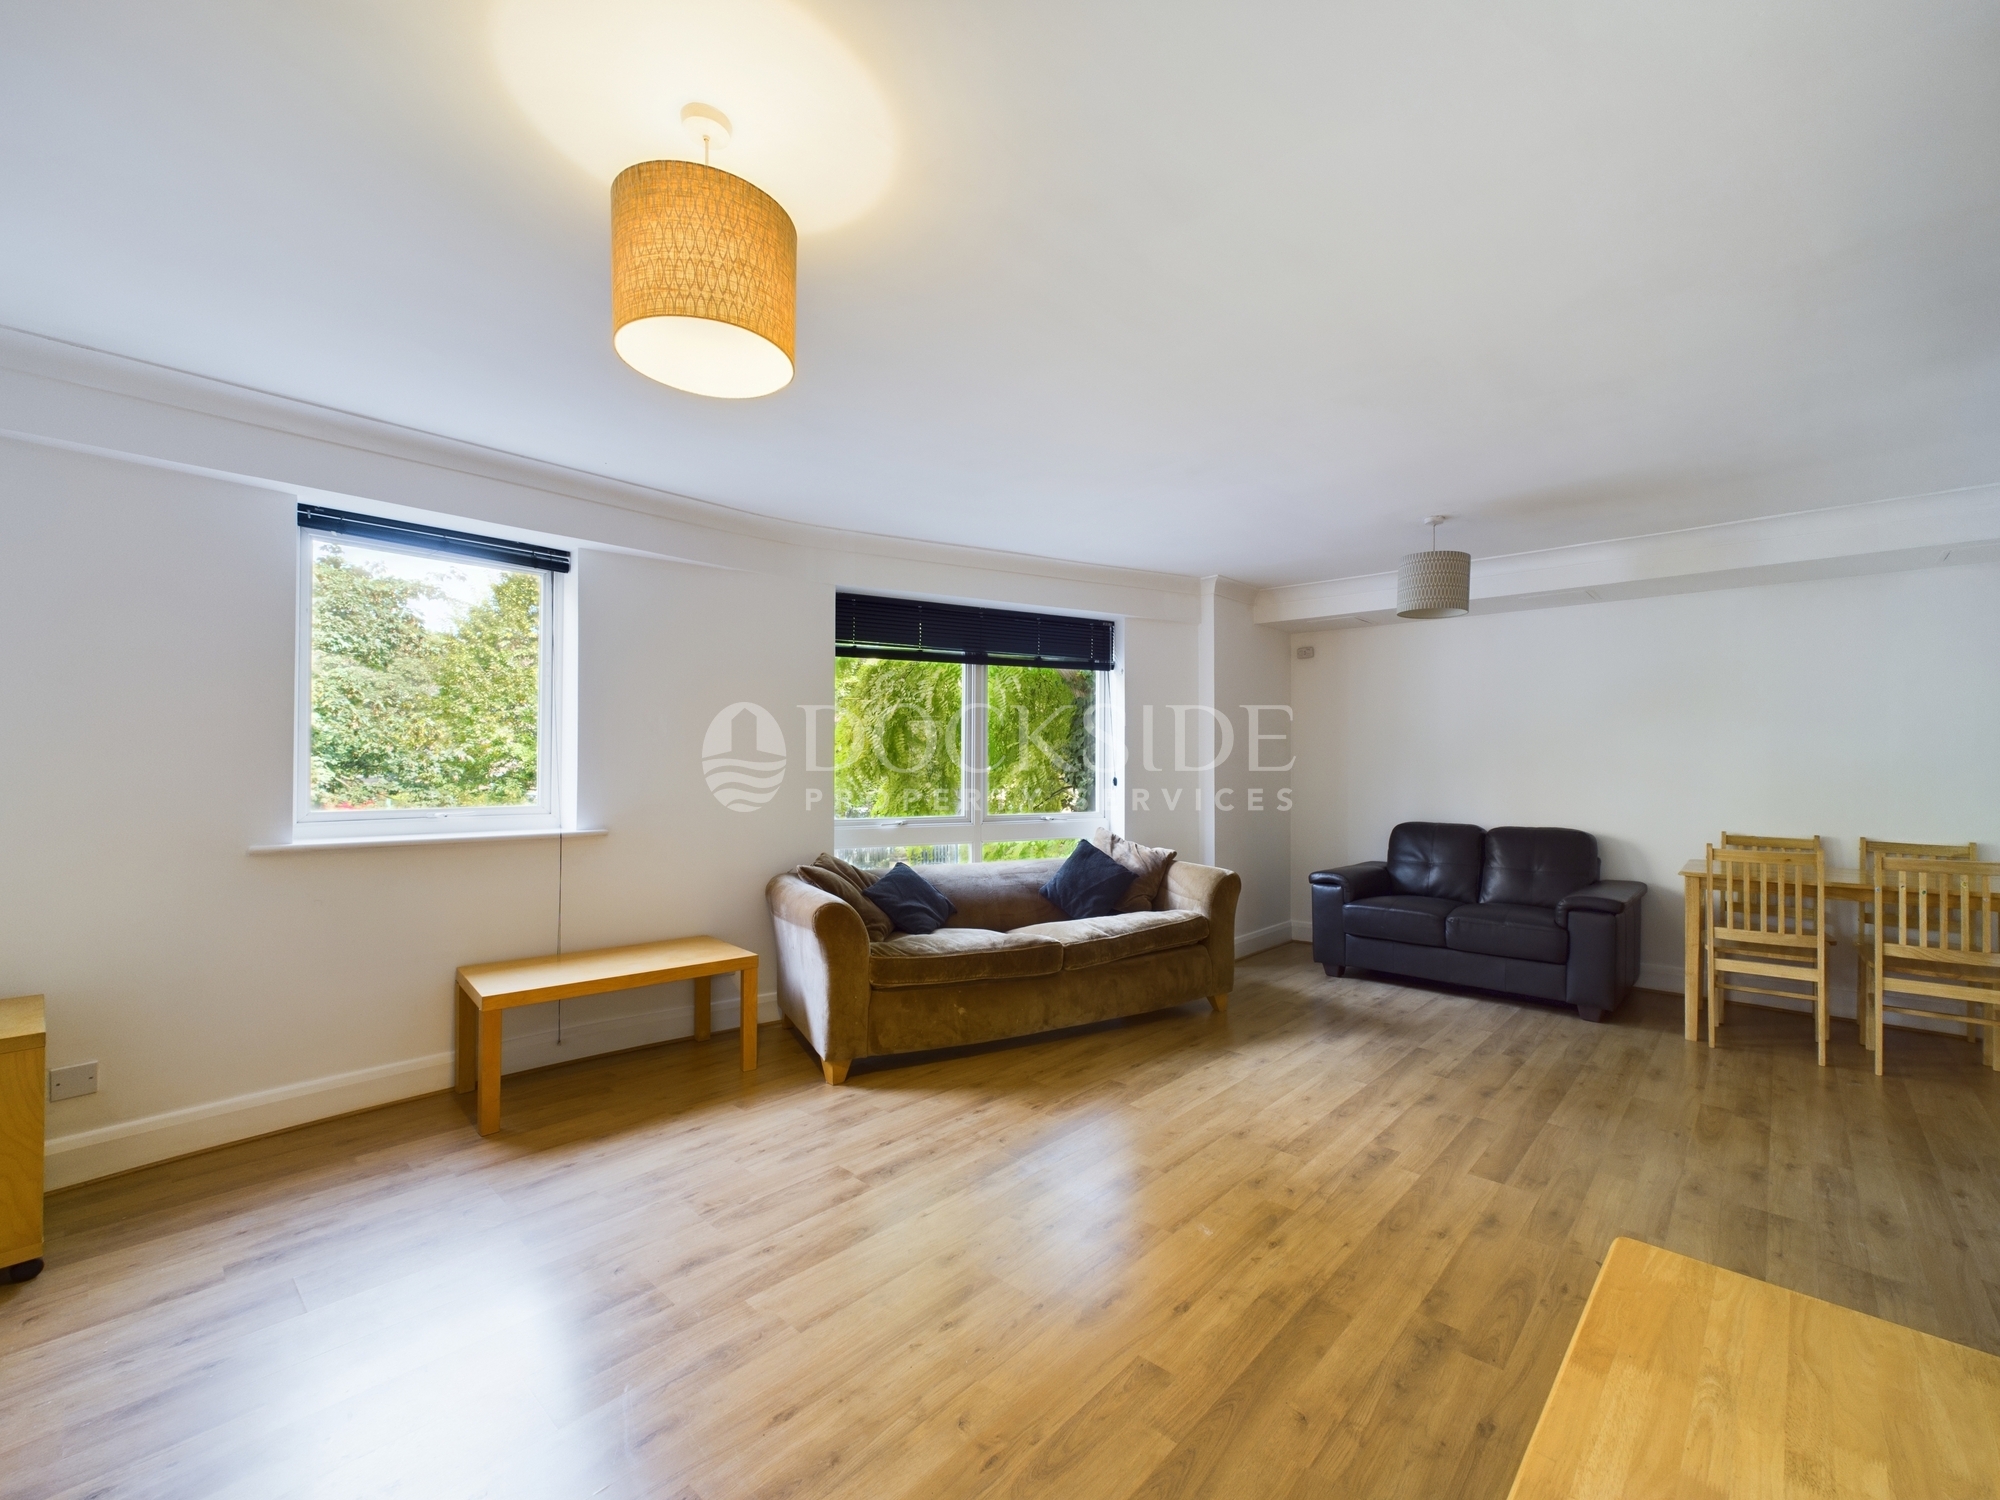 1 bed flat to rent in Caraway Heights, London, E14 